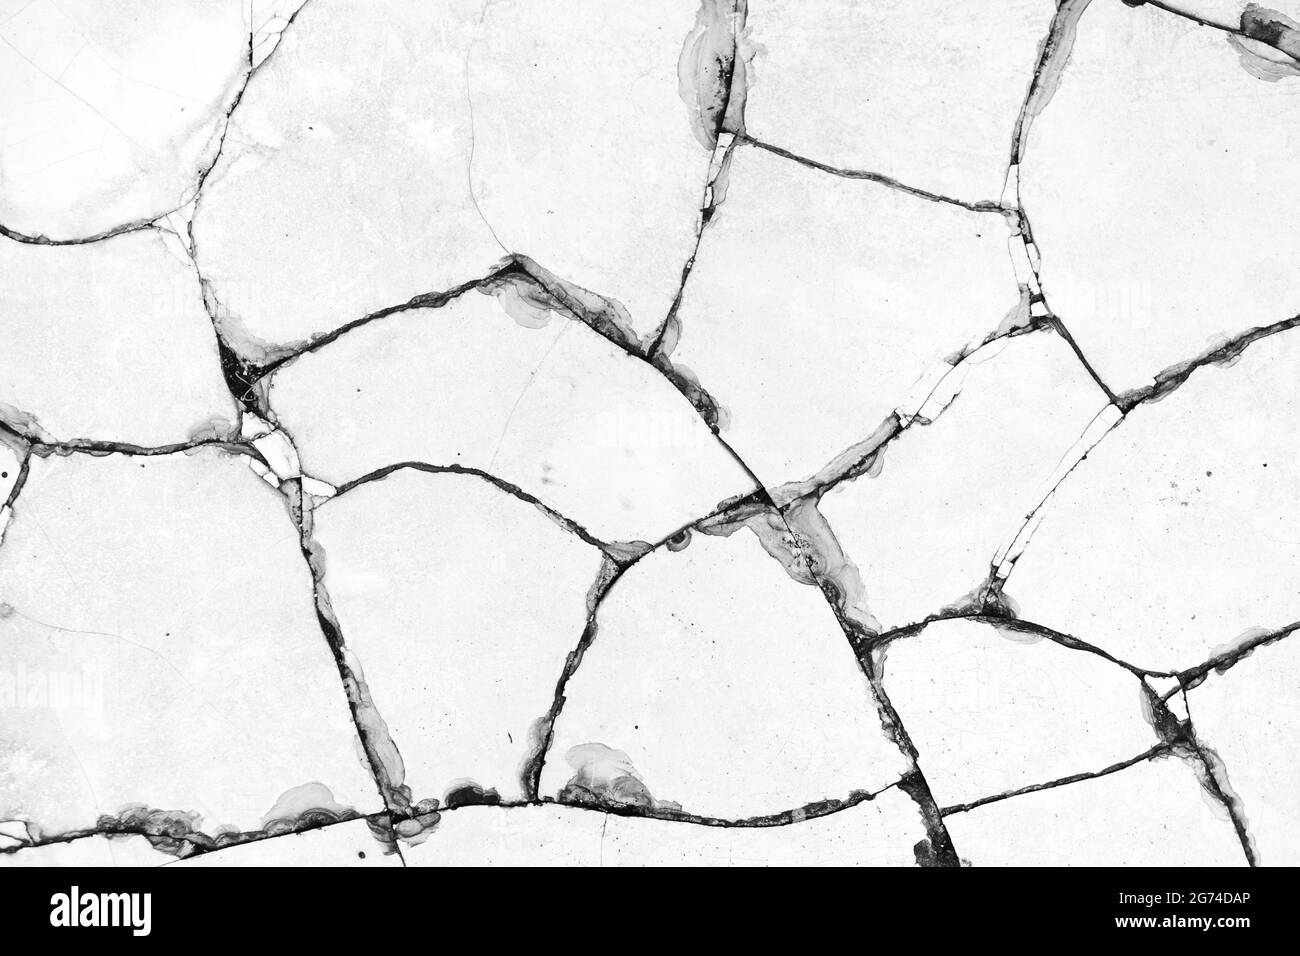 concrete crack texture. cracking mask ground cracks top view, old ruined pavement floor surface crushed tile destruction abstract for background. Stock Photo